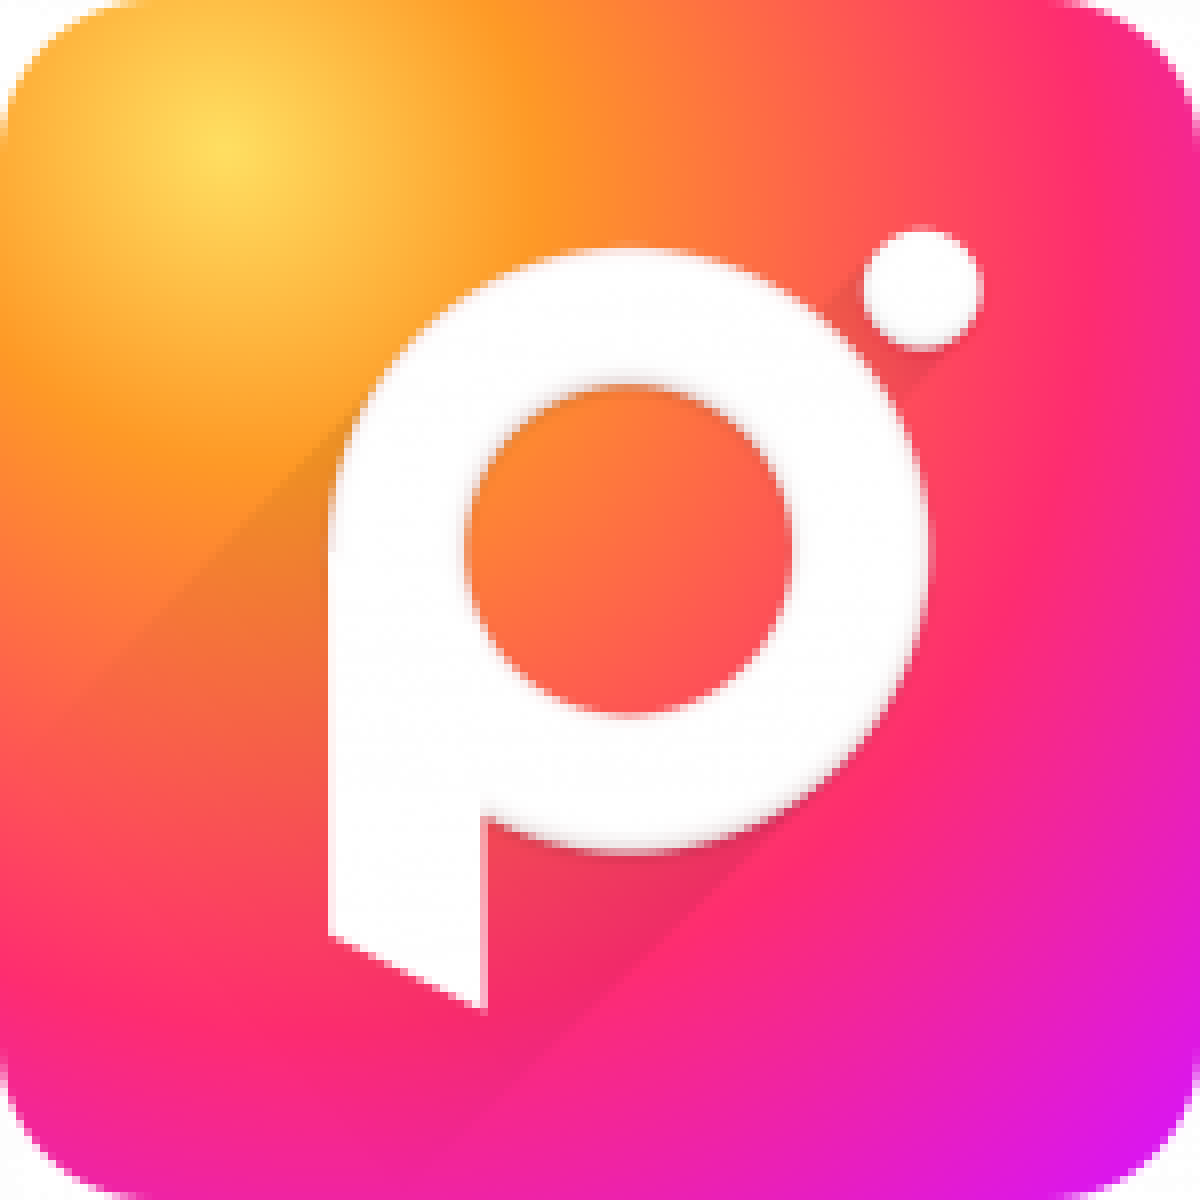 Photo Editor Pro Apk 1 333 83 Download Unlocked Free For Android